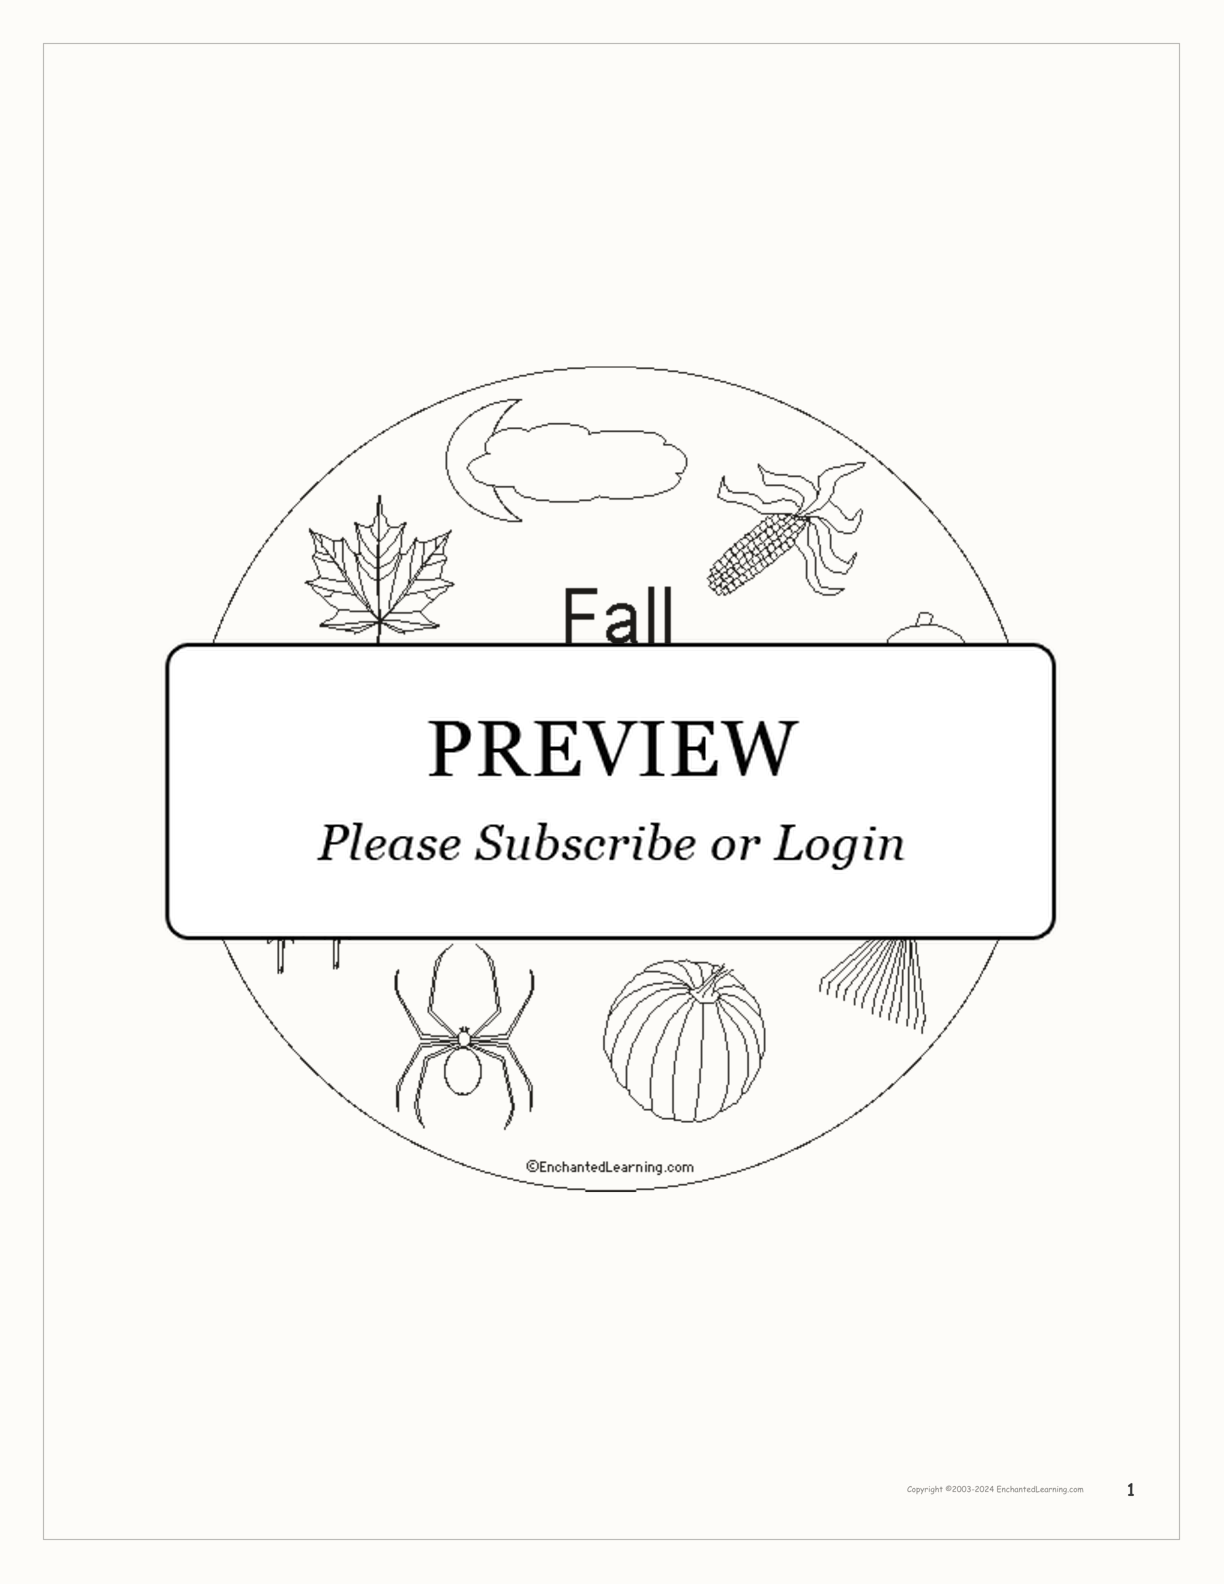 Autumn (Fall) Color Book for Early Readers interactive printout page 1